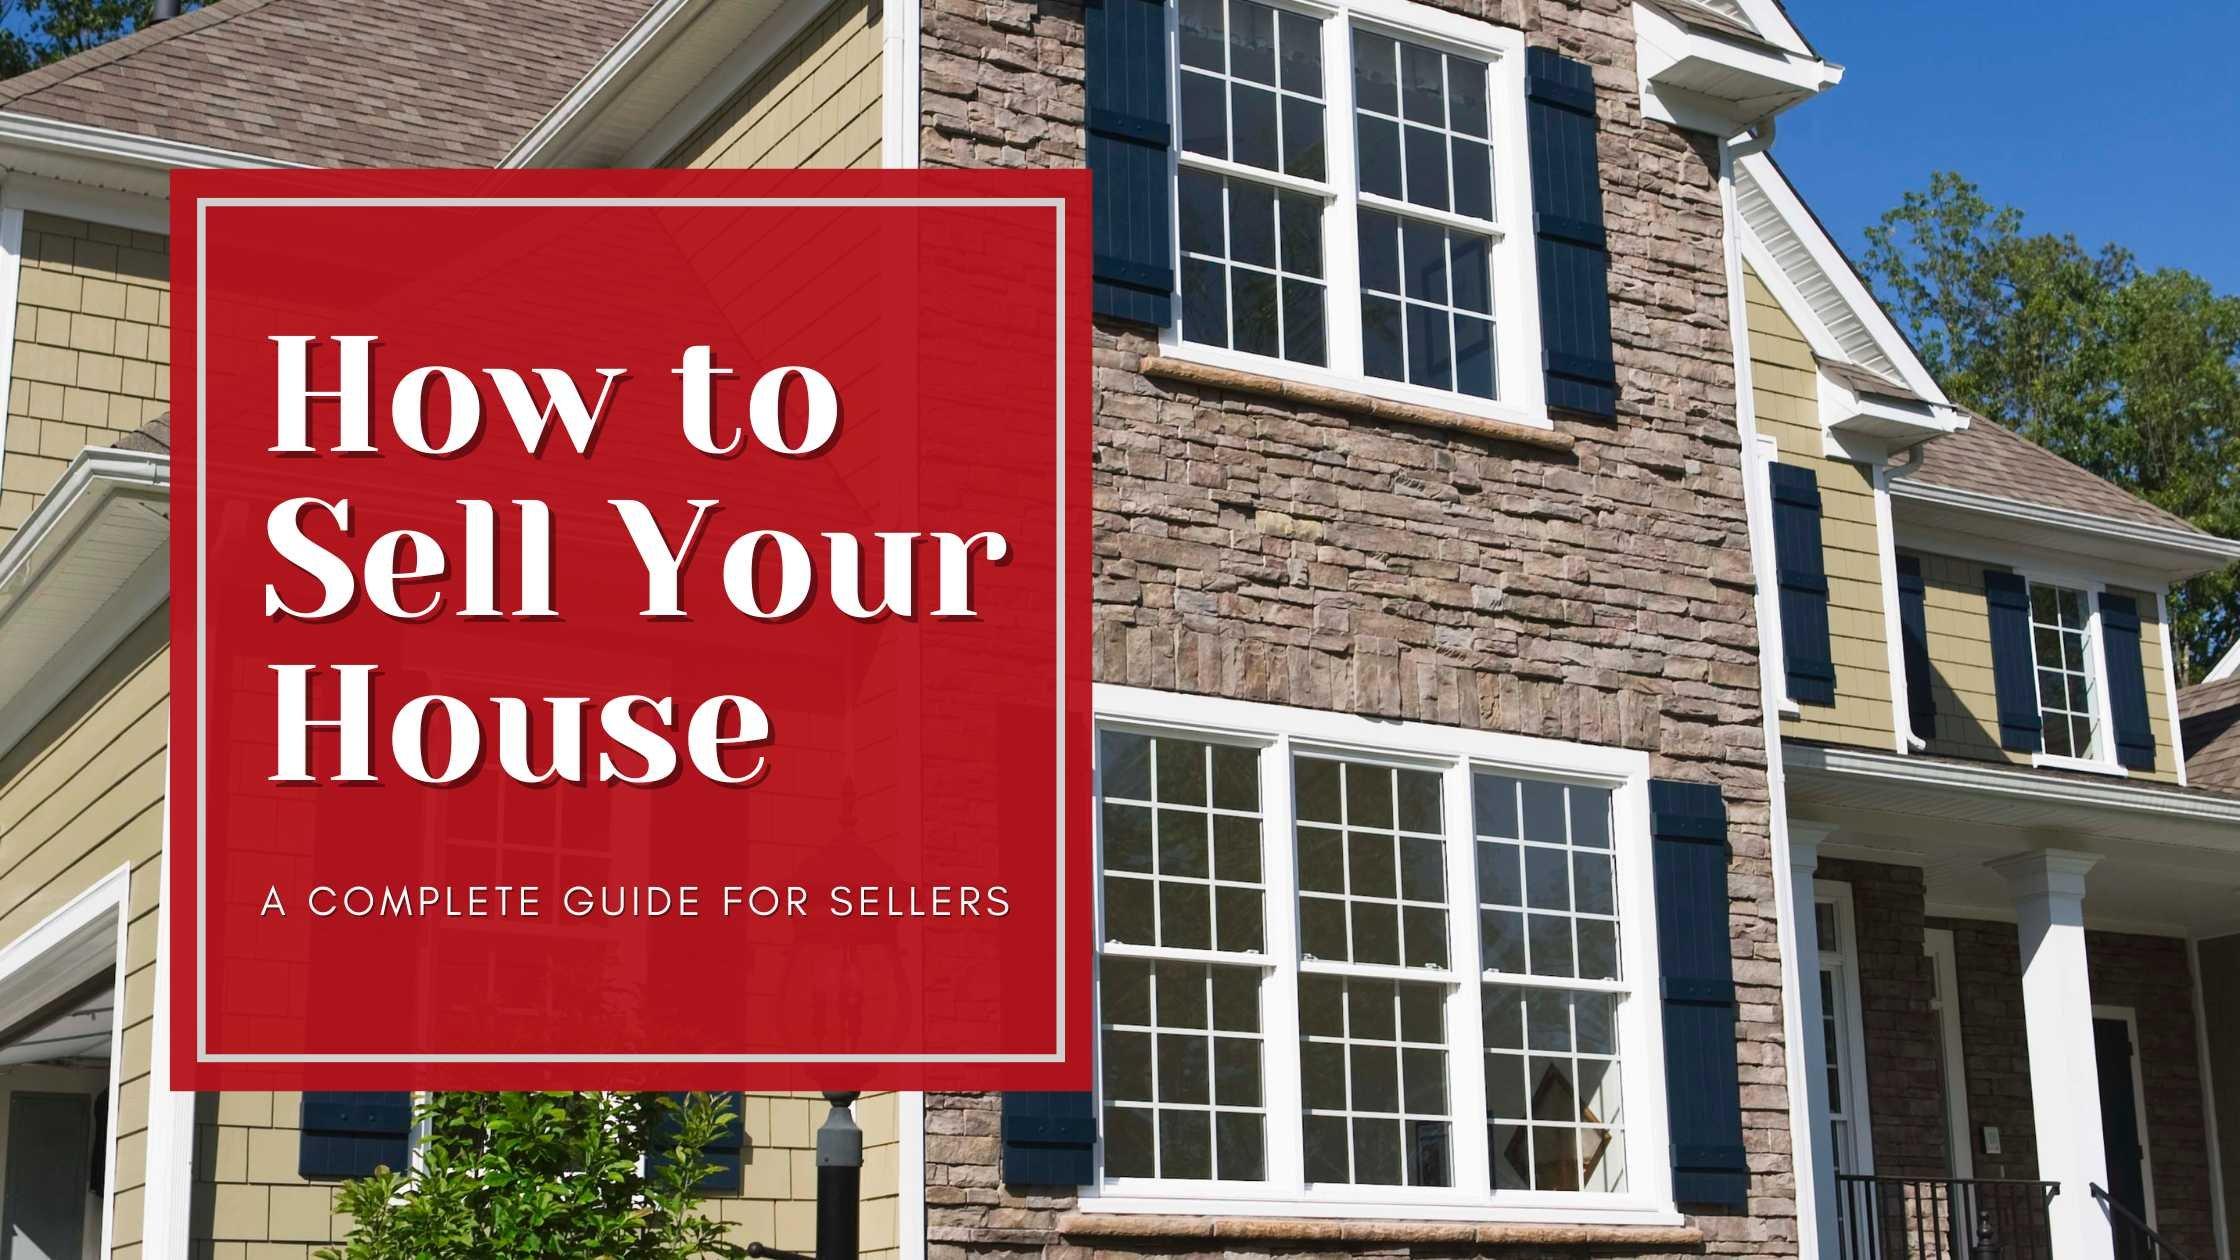 How to Sell Your House: A Complete Guide for Sellers in Raleigh